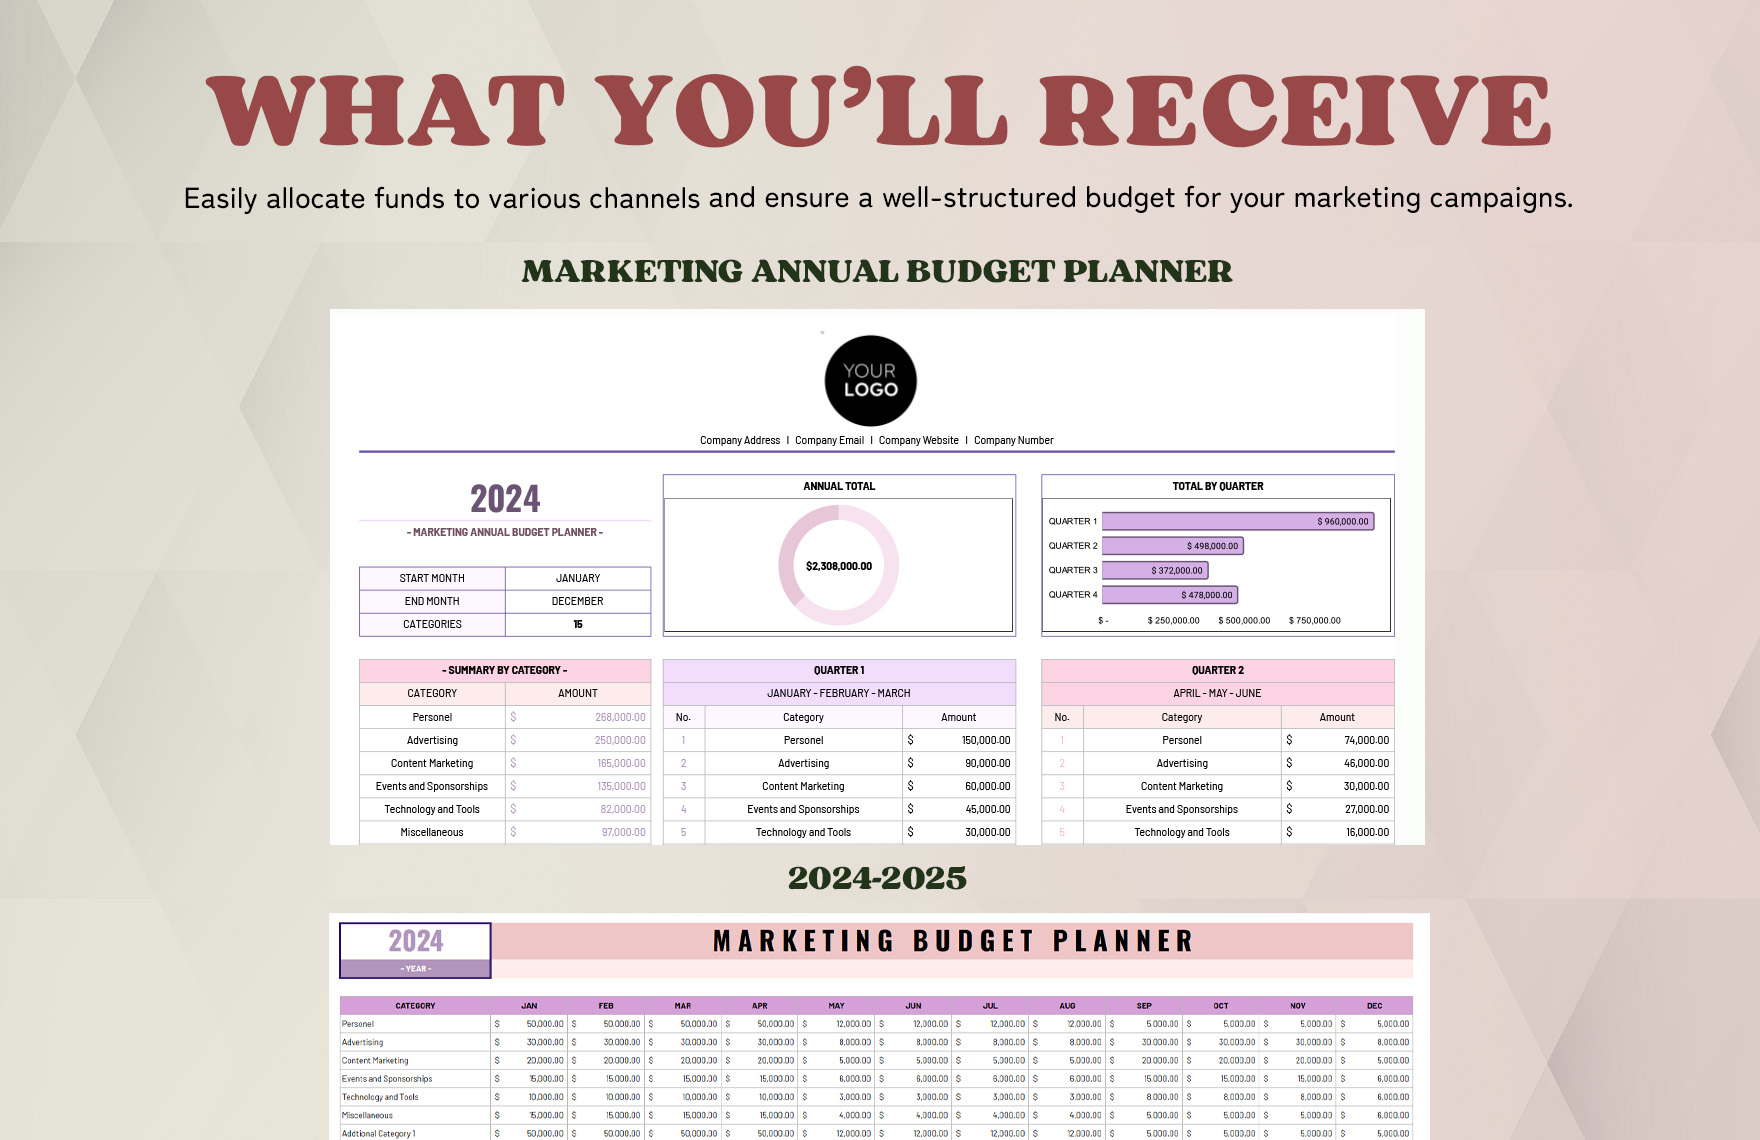 Marketing Annual Budget Planner Template